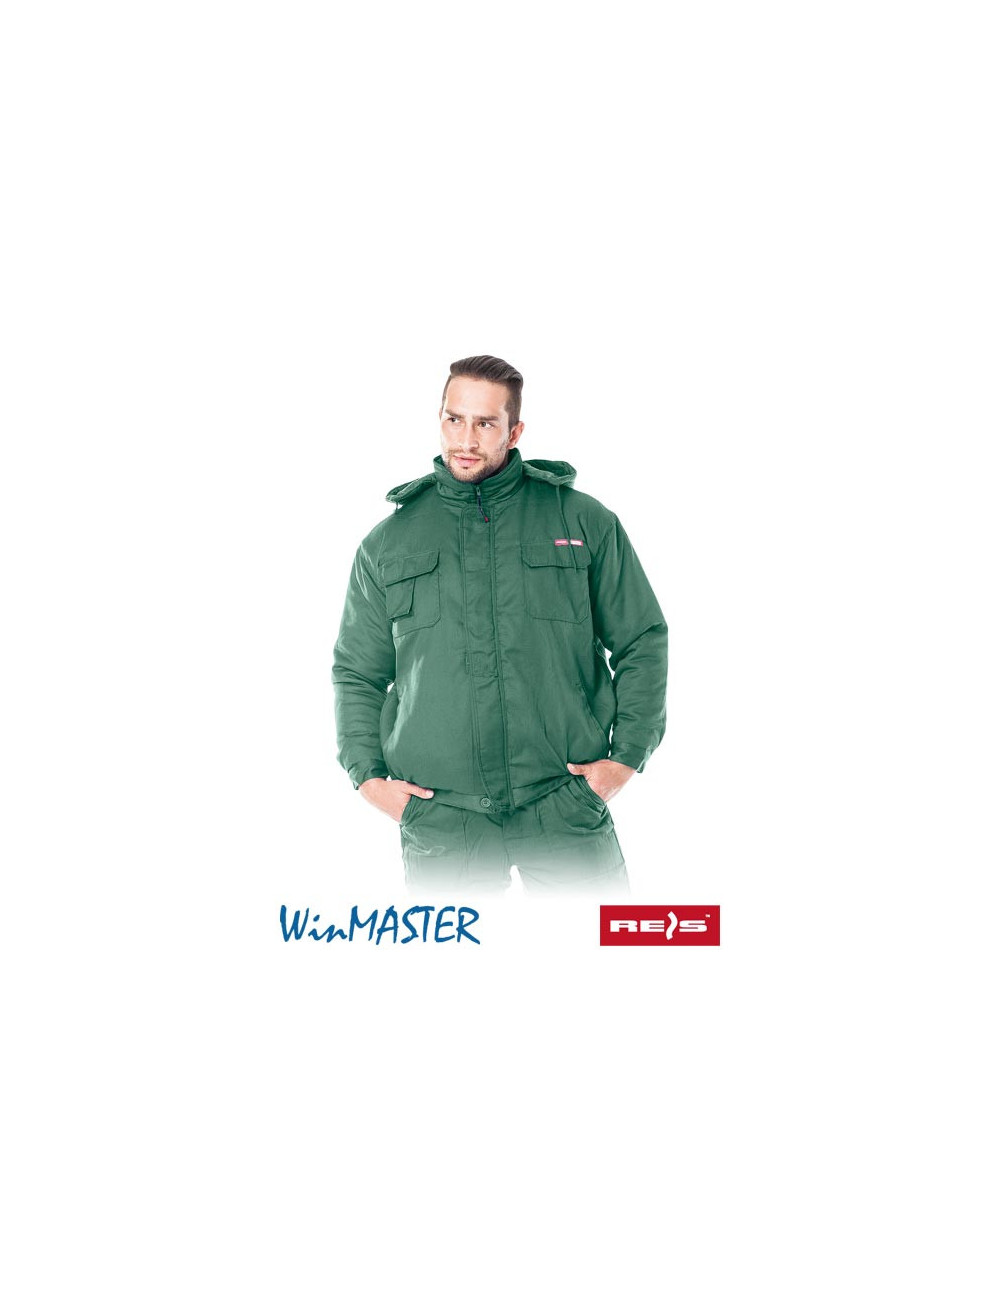 Protective jacket insulated kmo-plus with green Reis